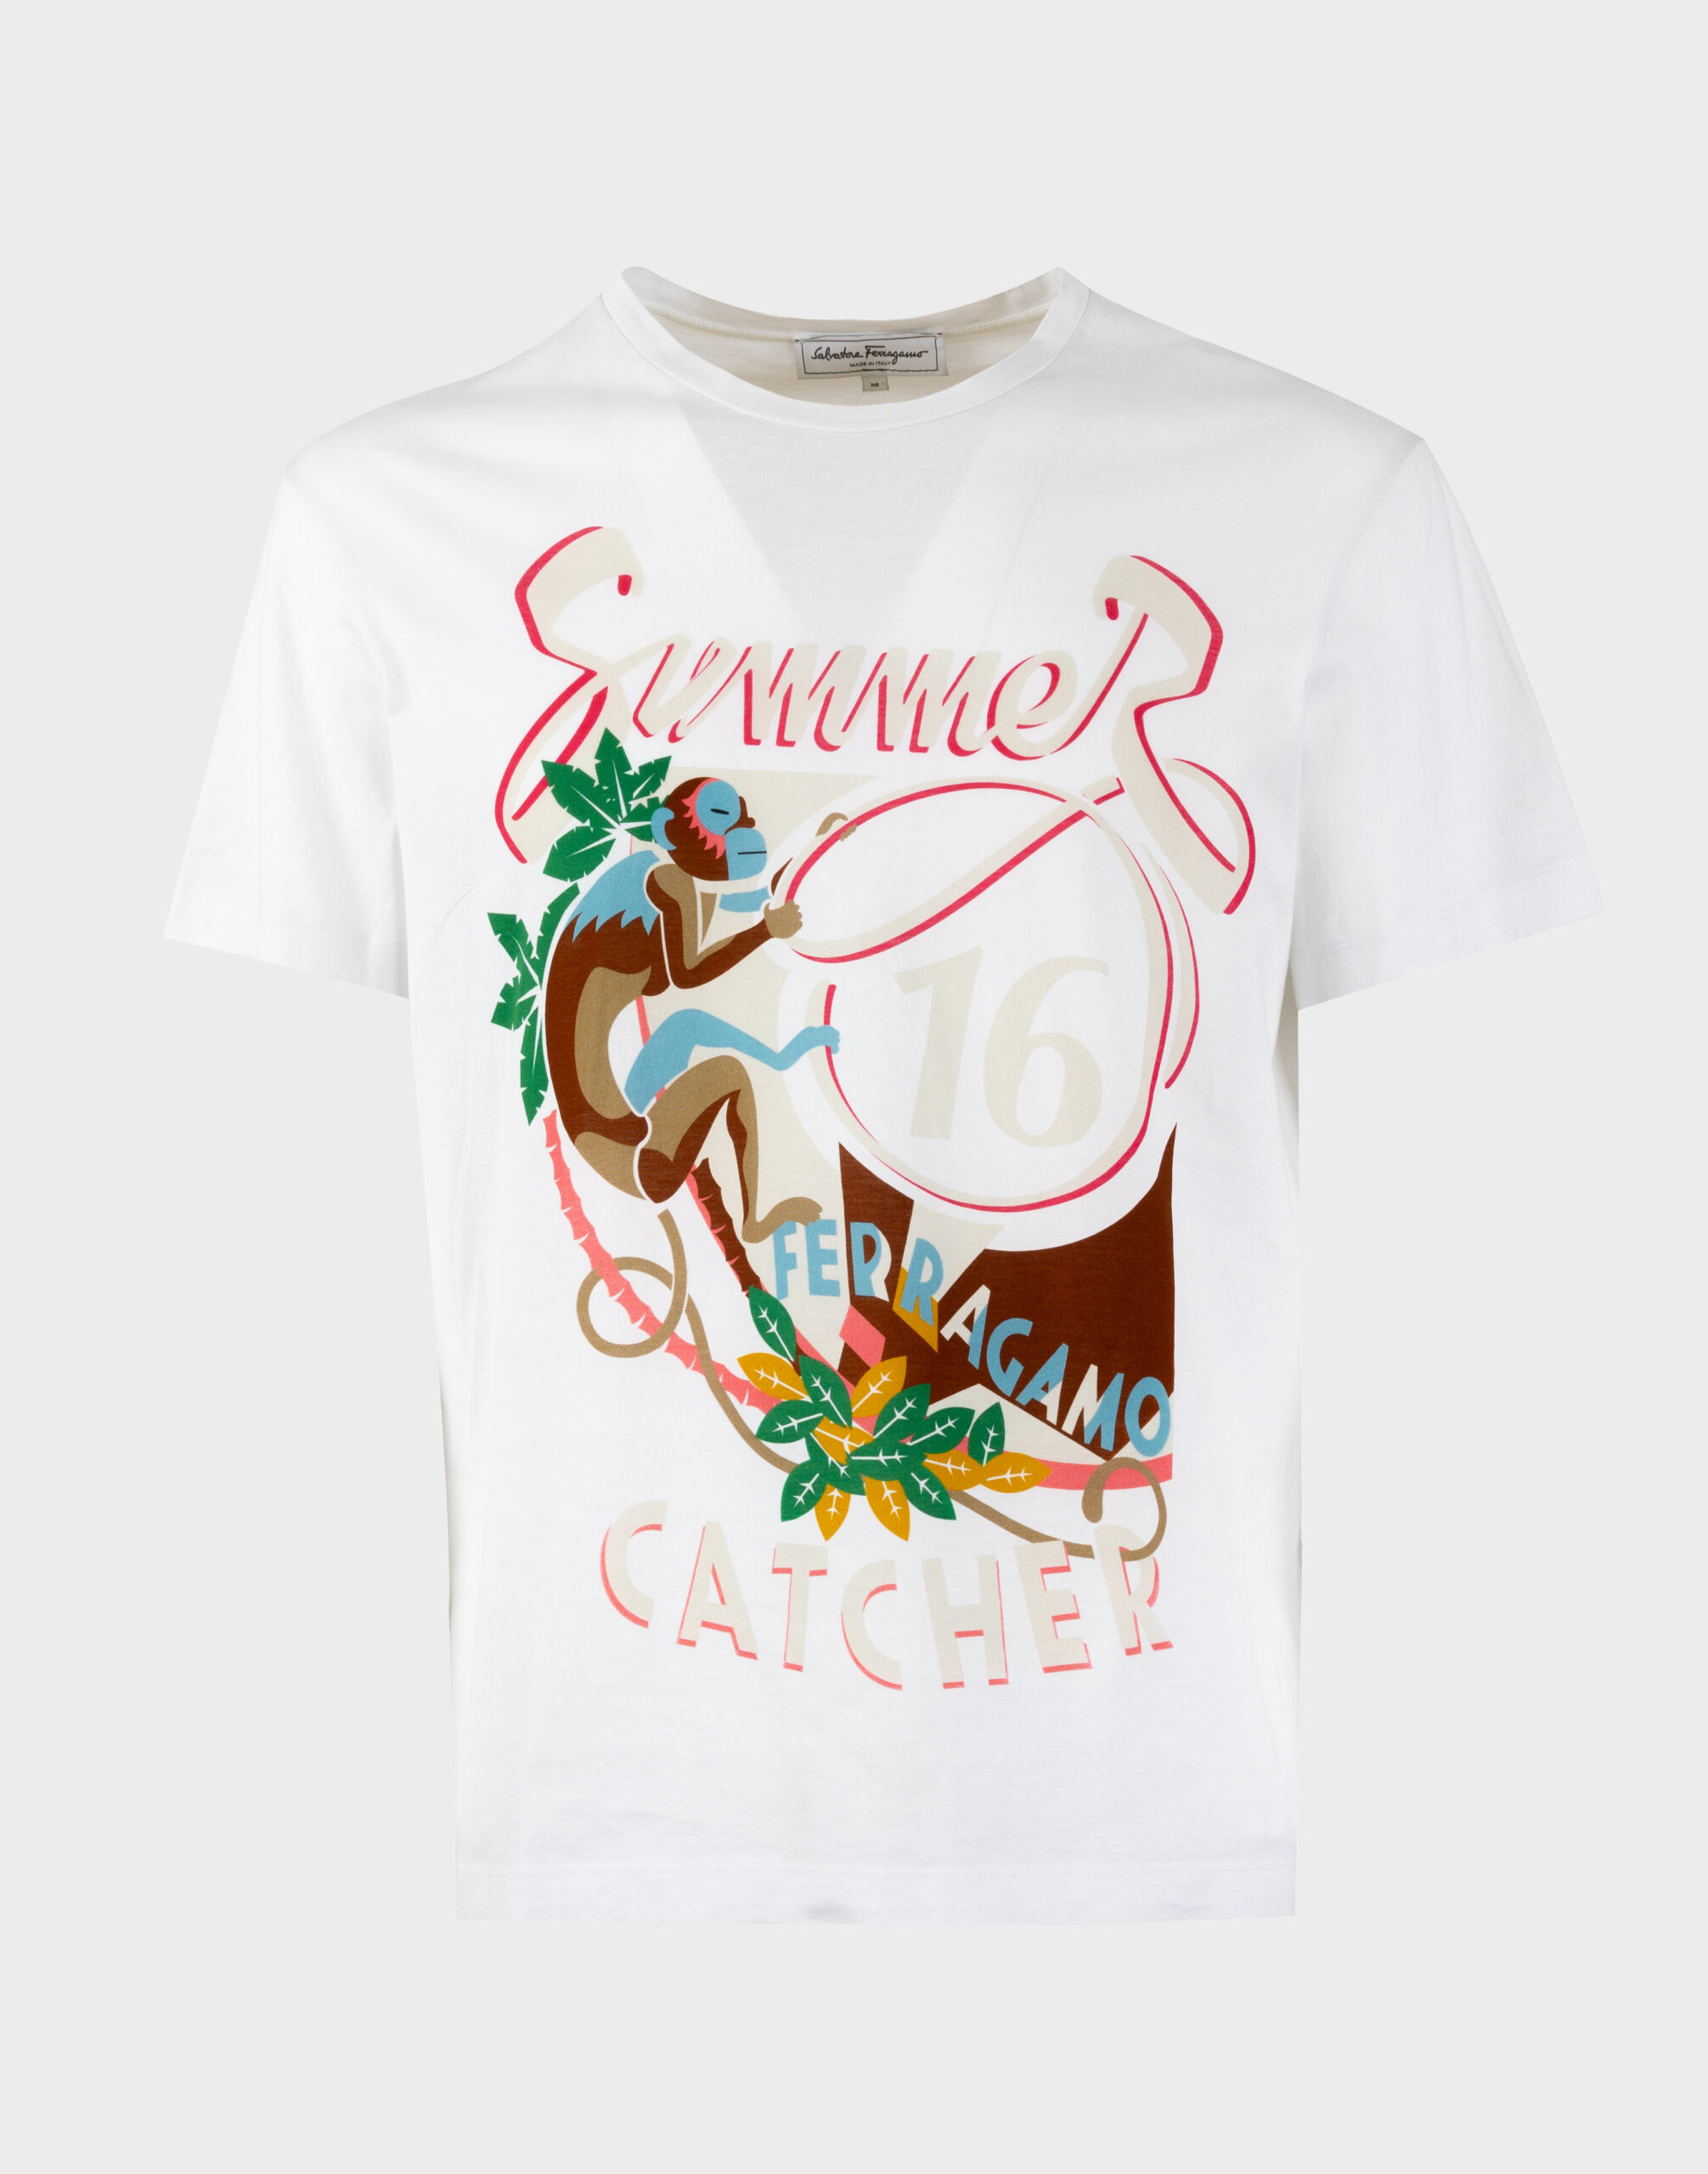 Men's white short-sleeved t-shirt from the 1990s with "Summer Catcher" print on the front